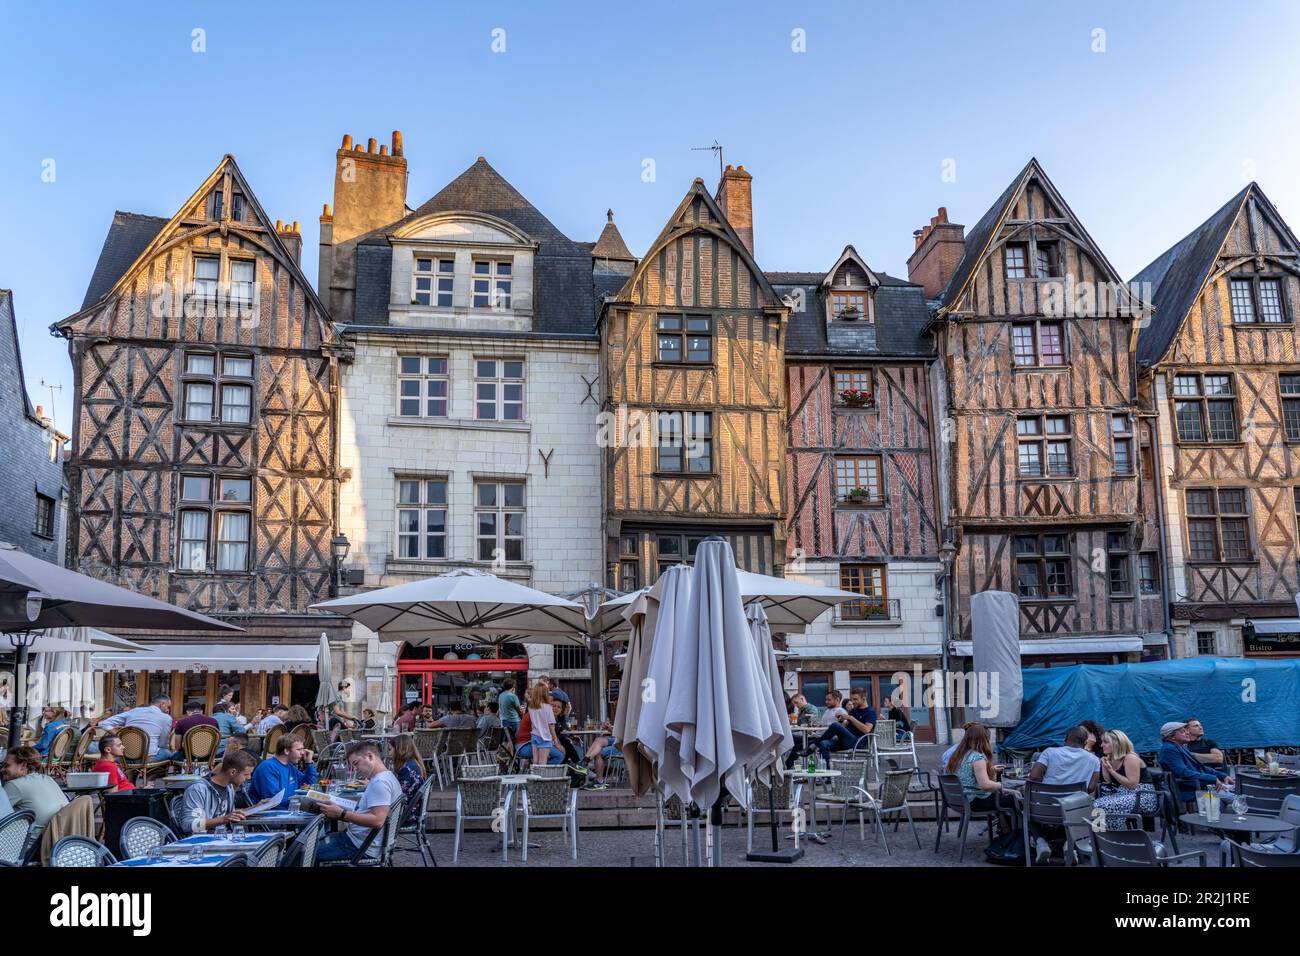 Medieval buildings and packed restaurants in the central square, Place Plumereau, Tours, Loire Valley, France Stock Photo